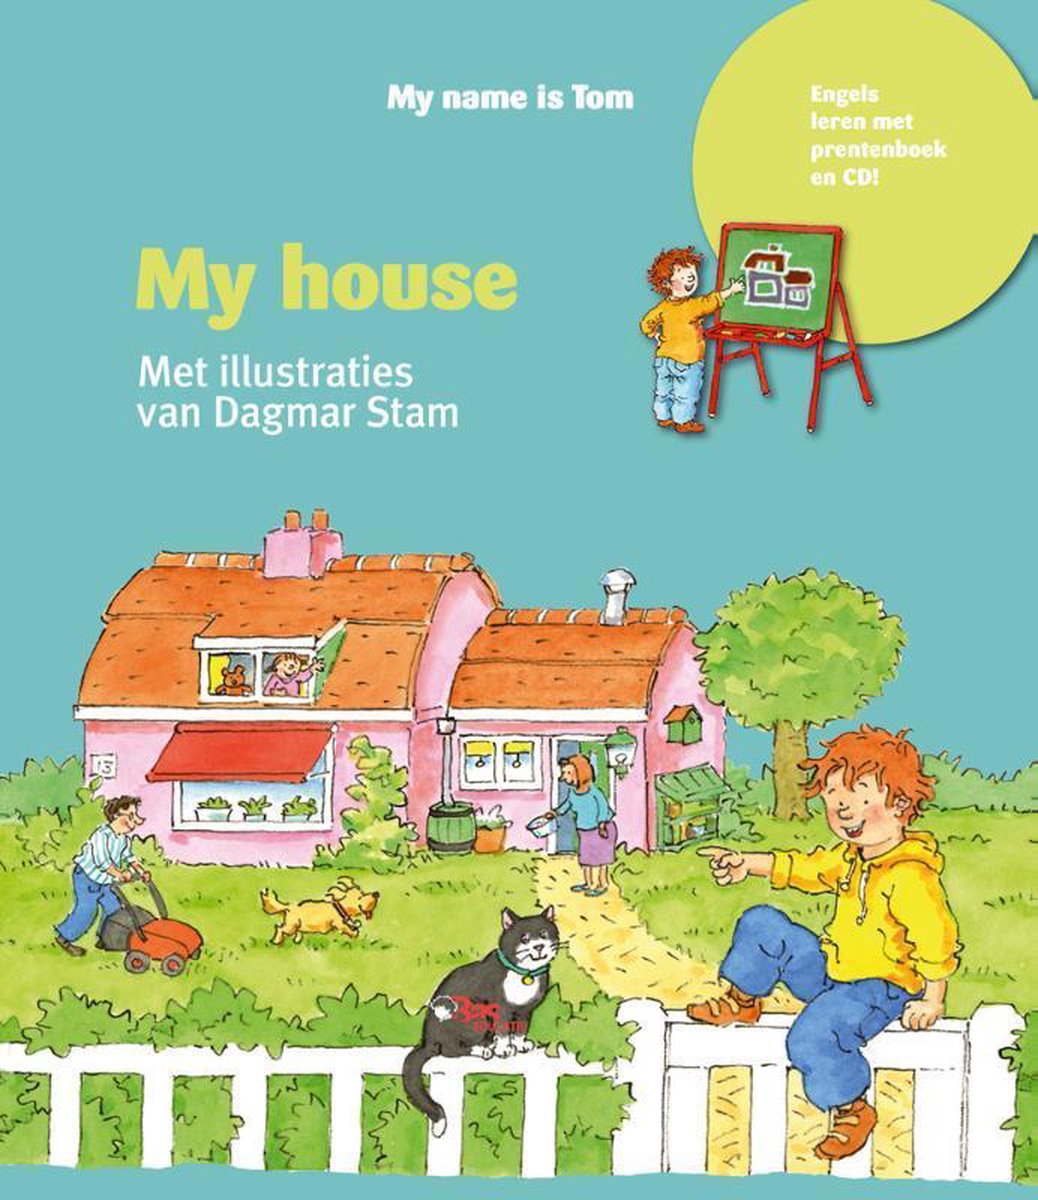 My house / My name is Tom